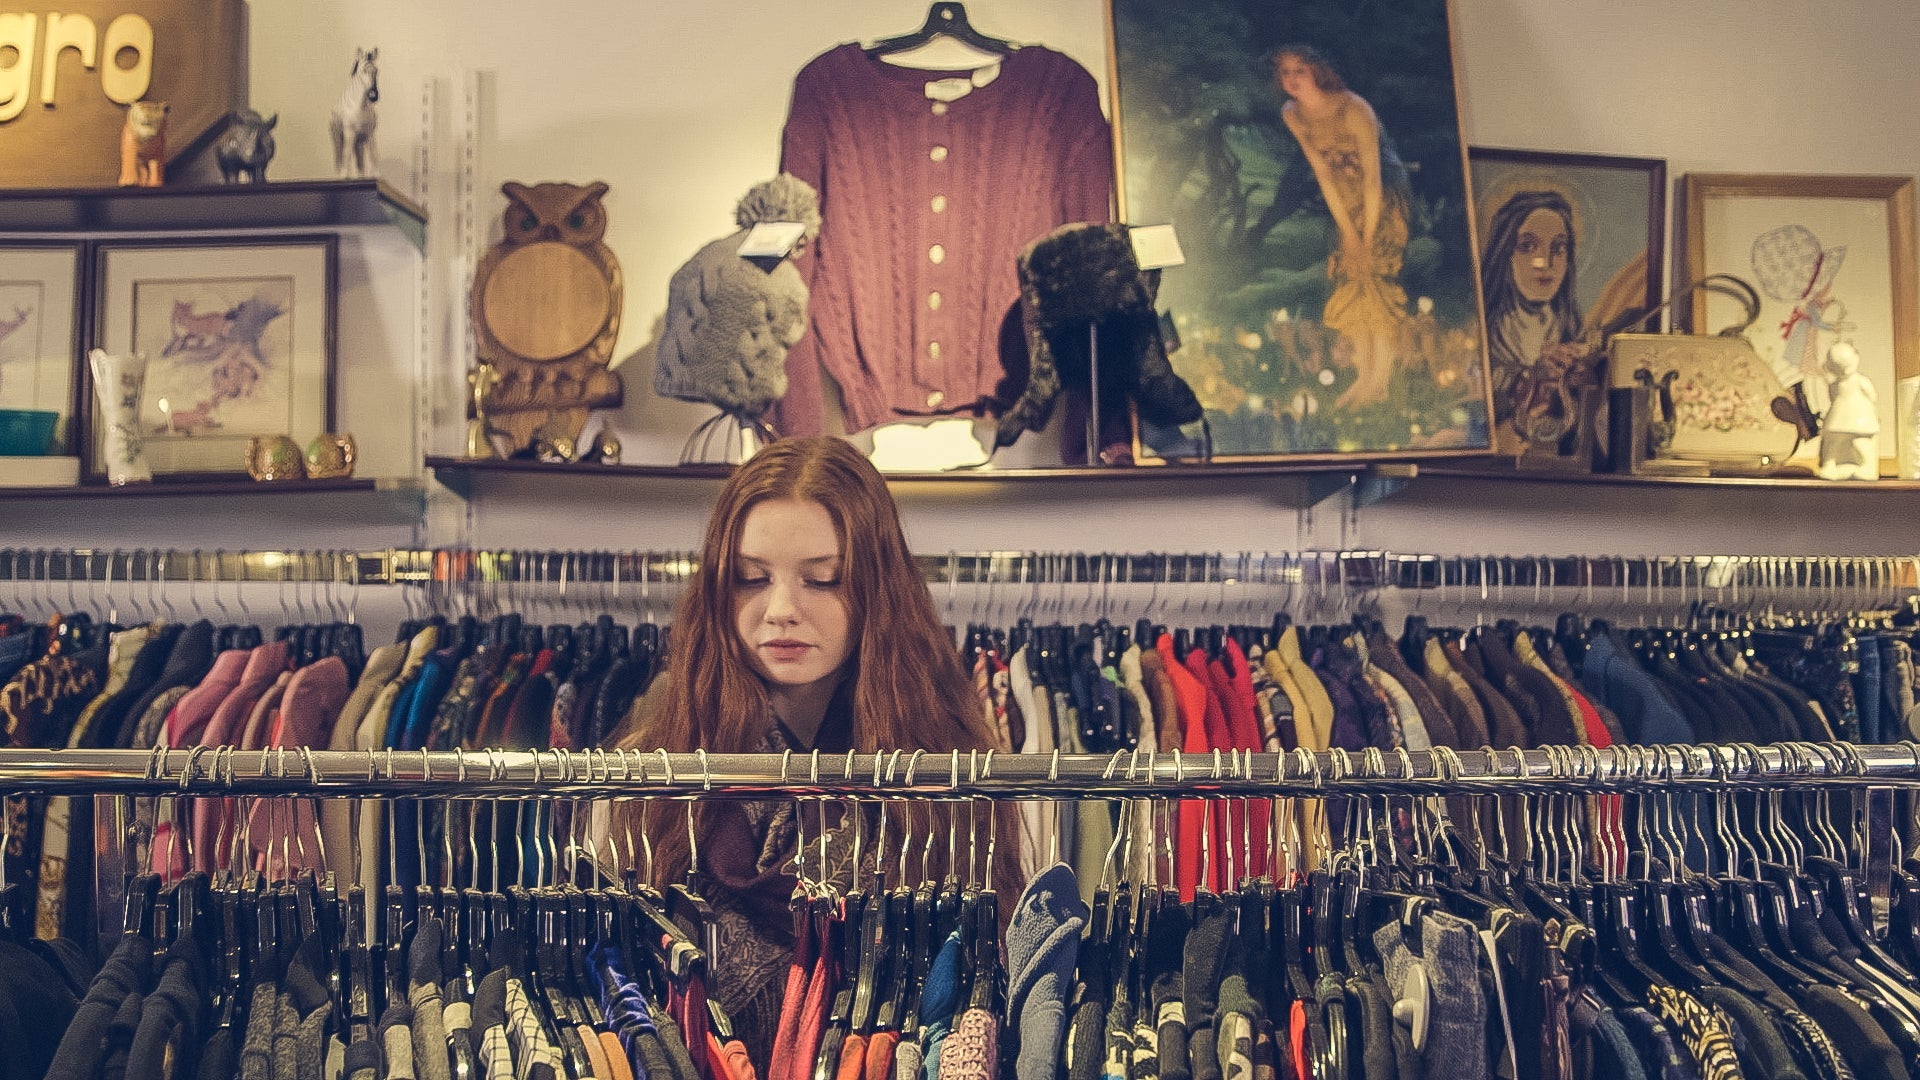 A person browses a clothing rack in a small boutique